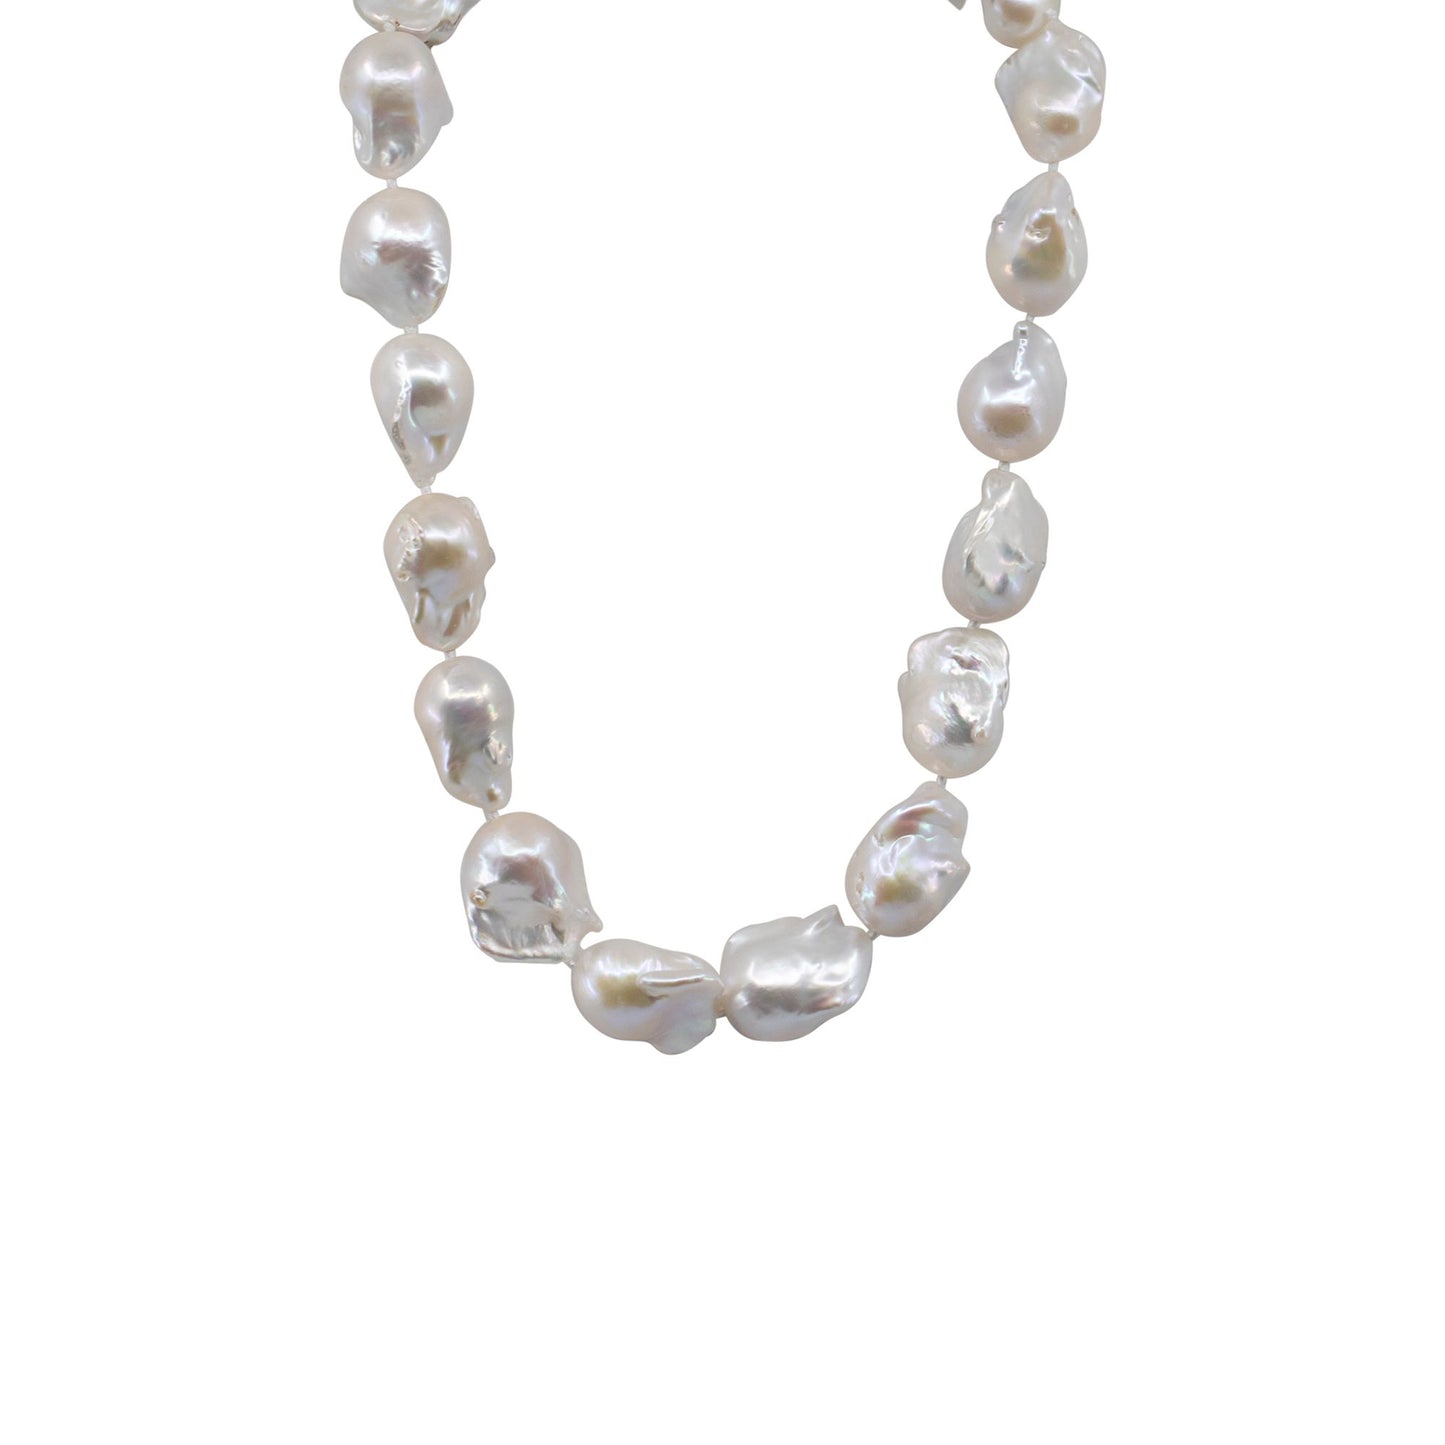 Jennifer All Baroque Freshwater Pearl Necklace